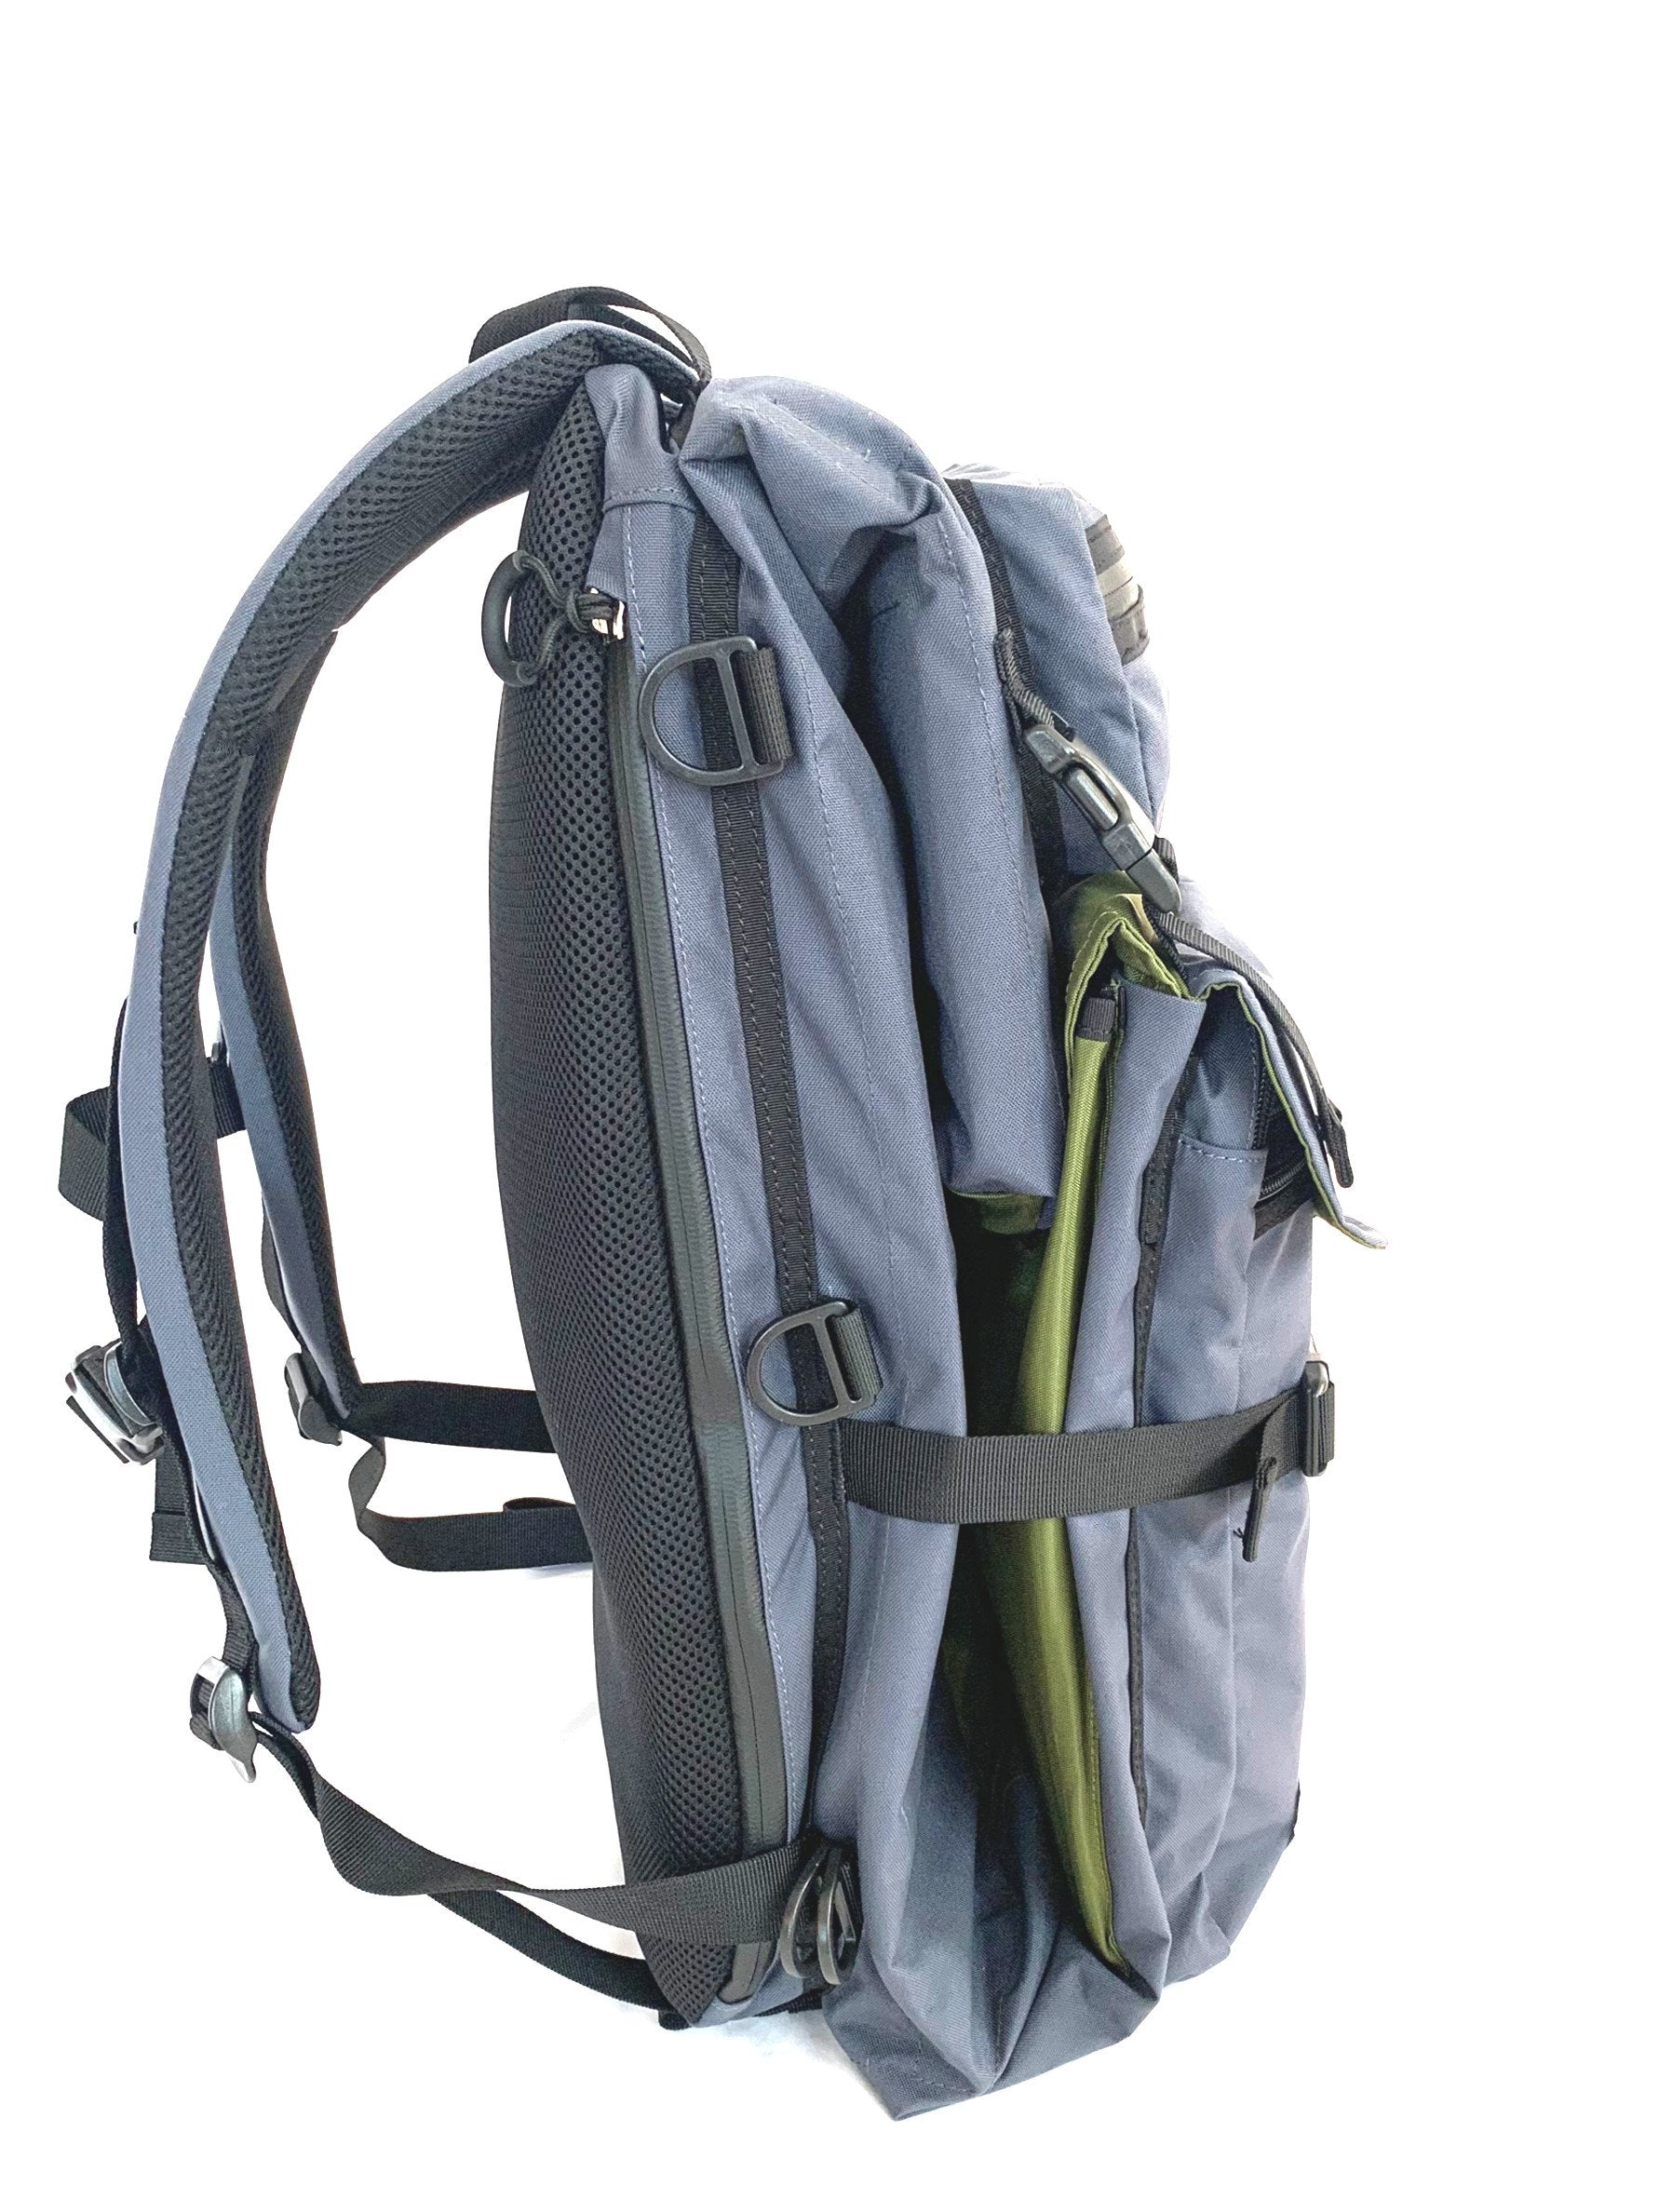 The Fly Commute Pack – Bug Eye Original